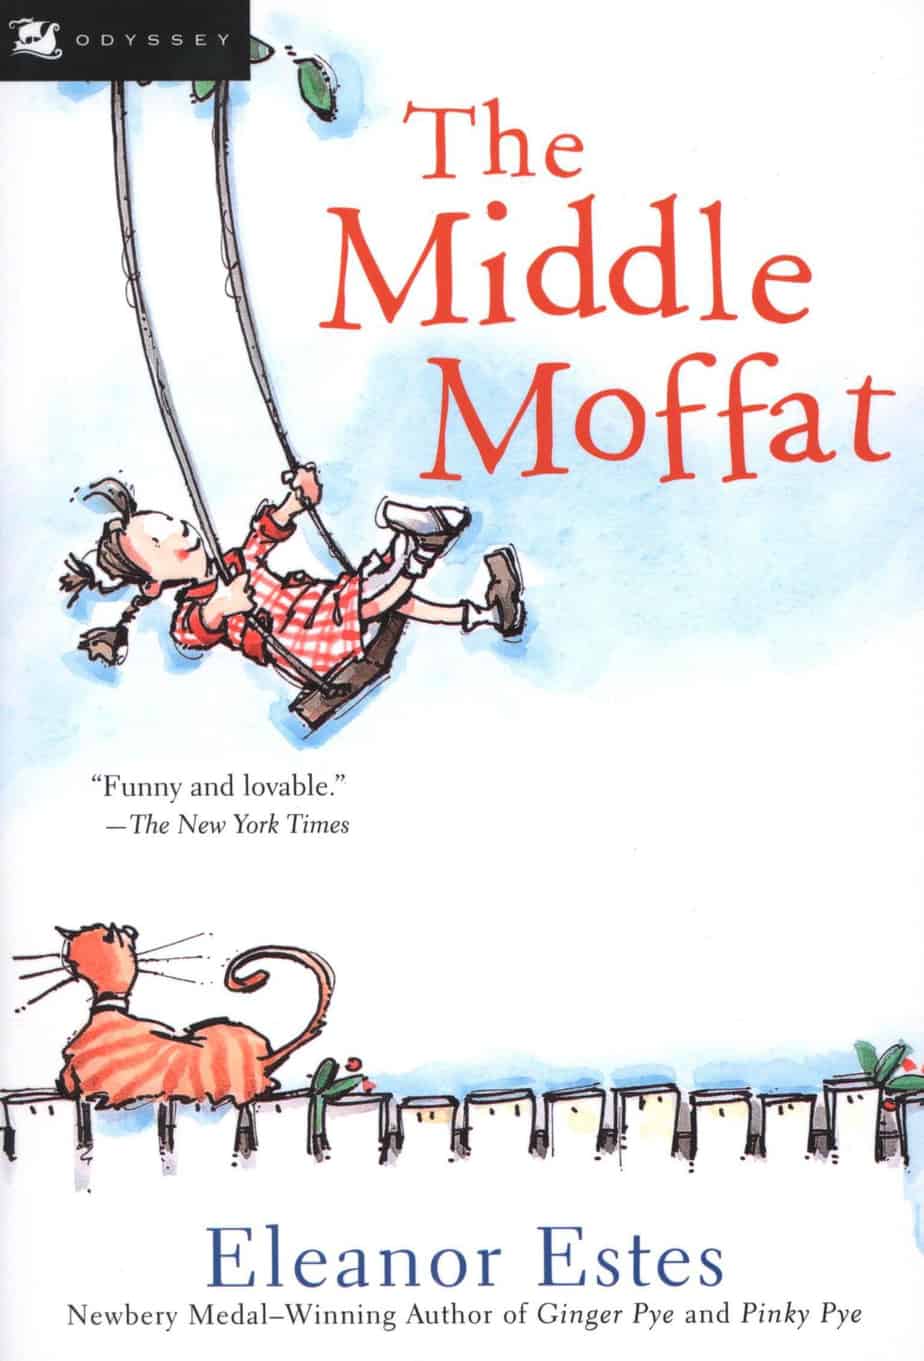 The Middle Moffat by Eleanor Estes. Cat on a fence watching a girl high above on a swing.